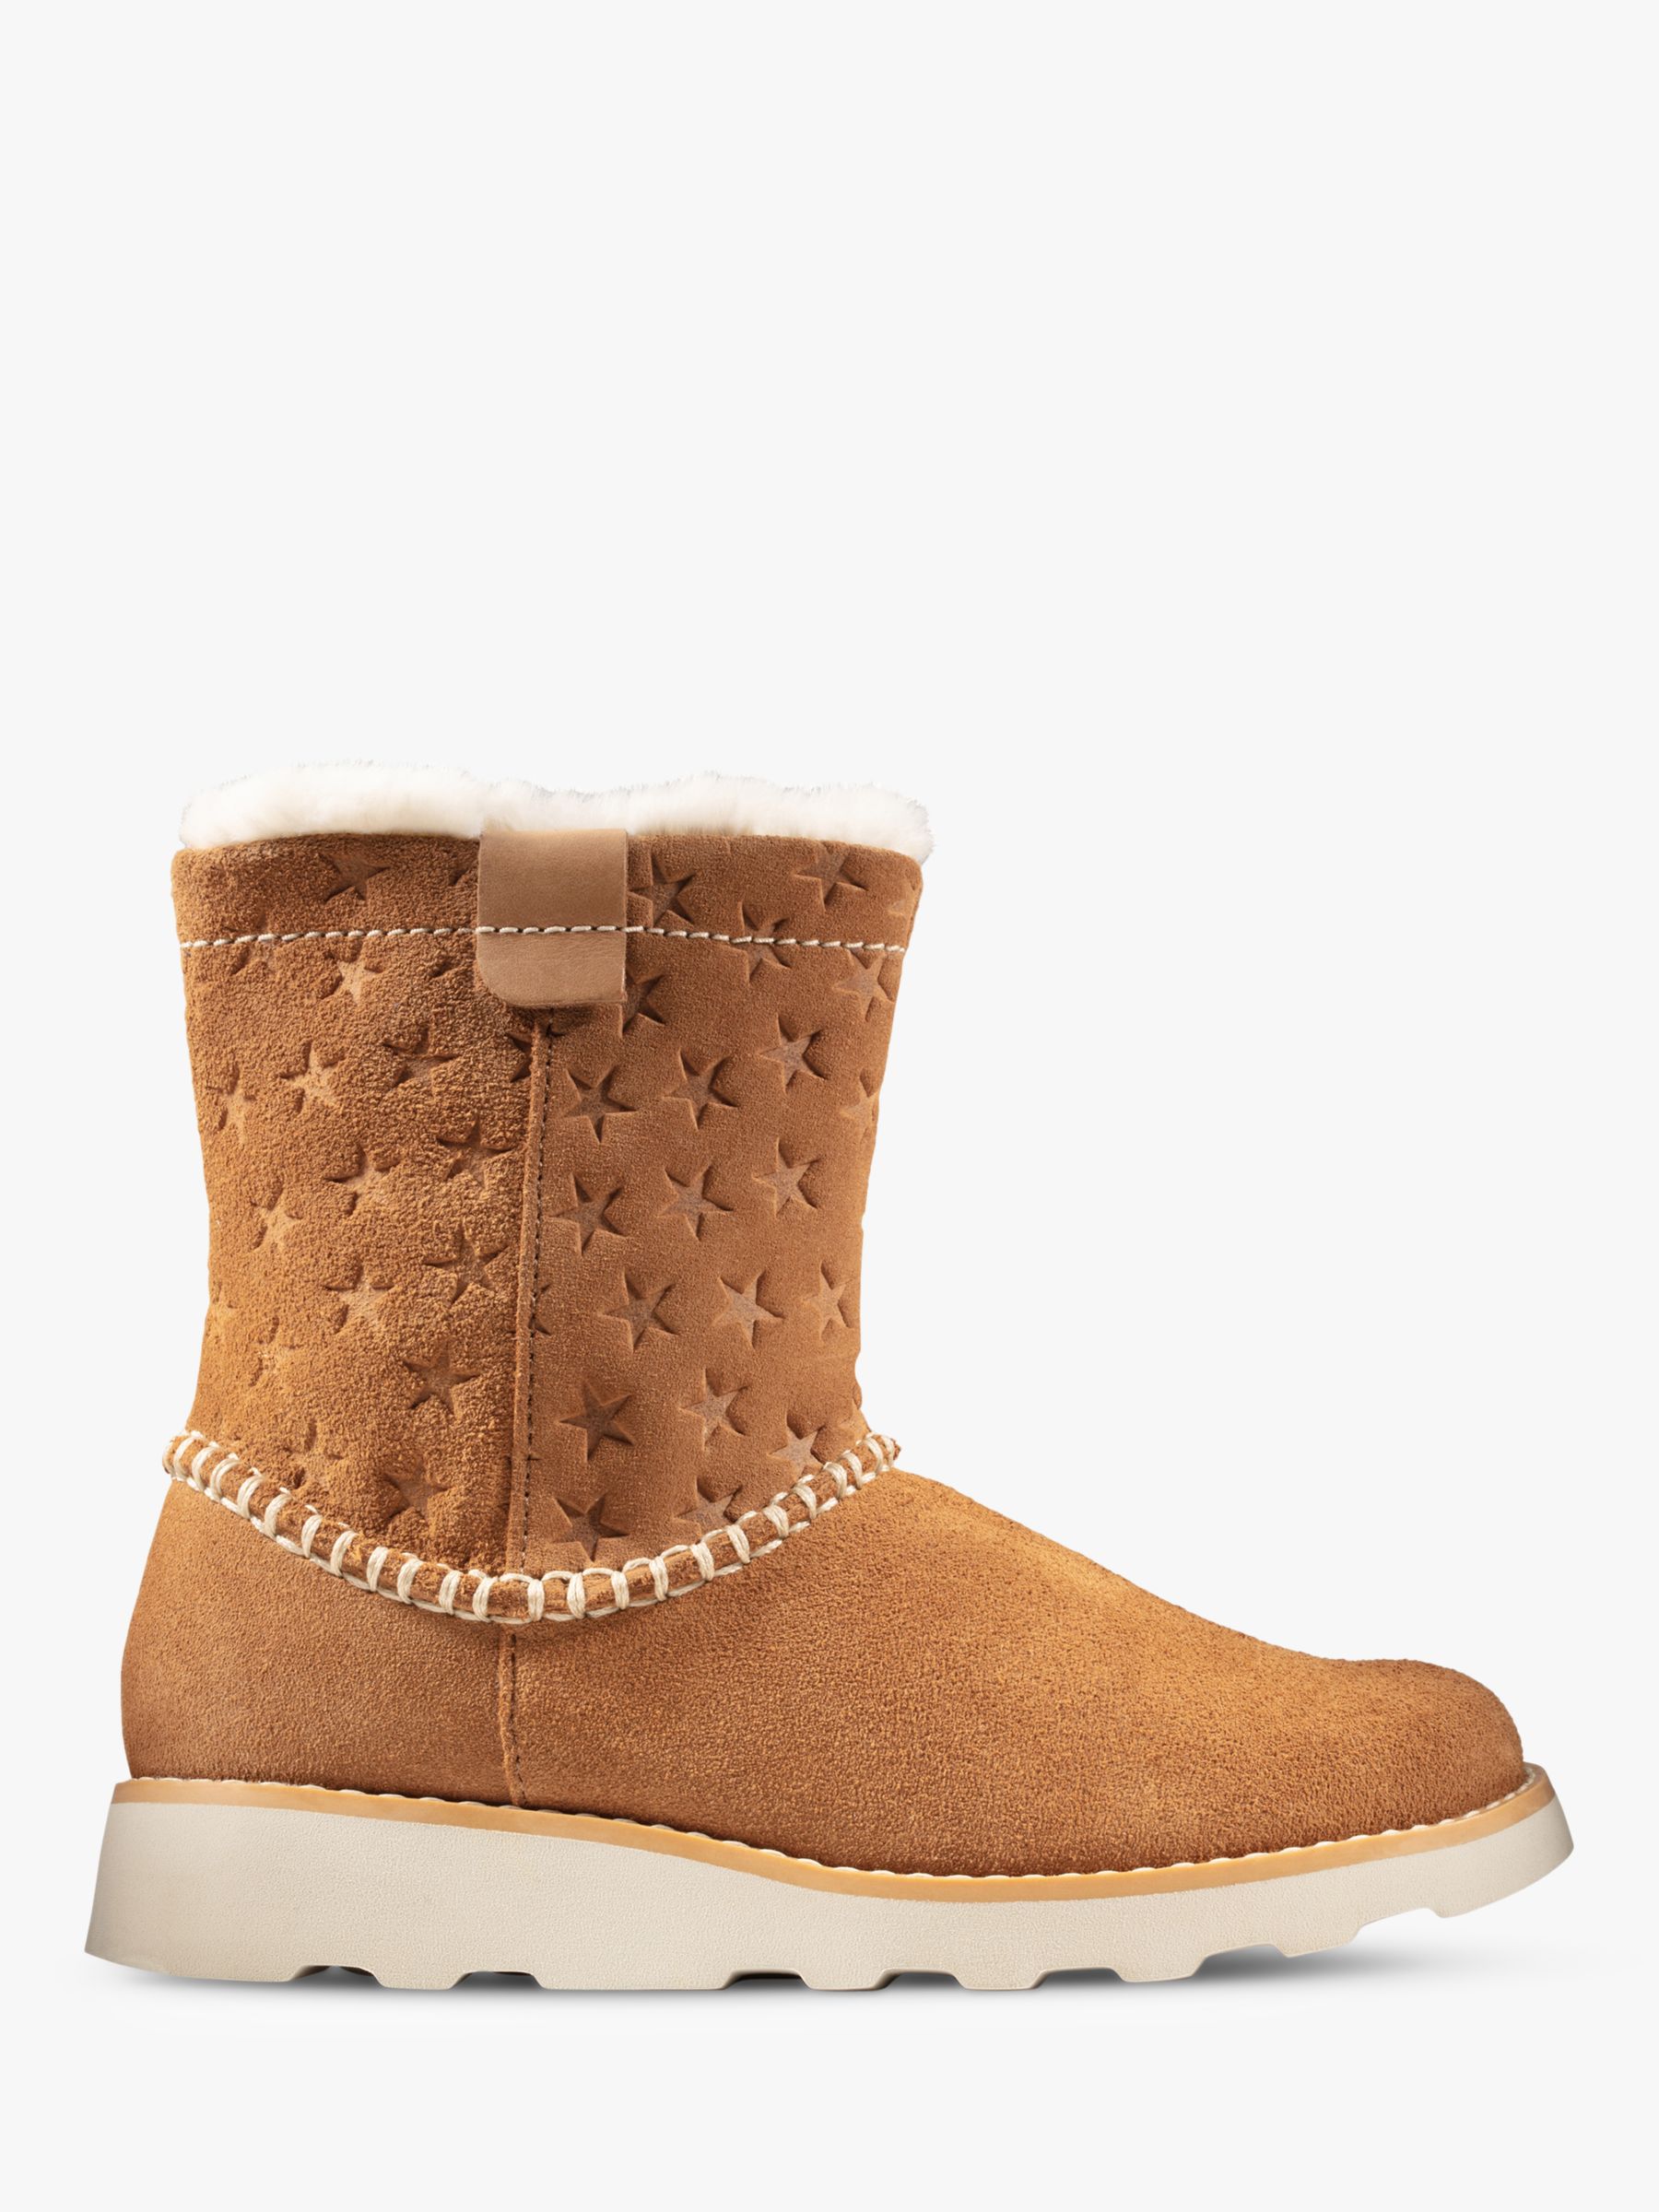 clarks long suede boots